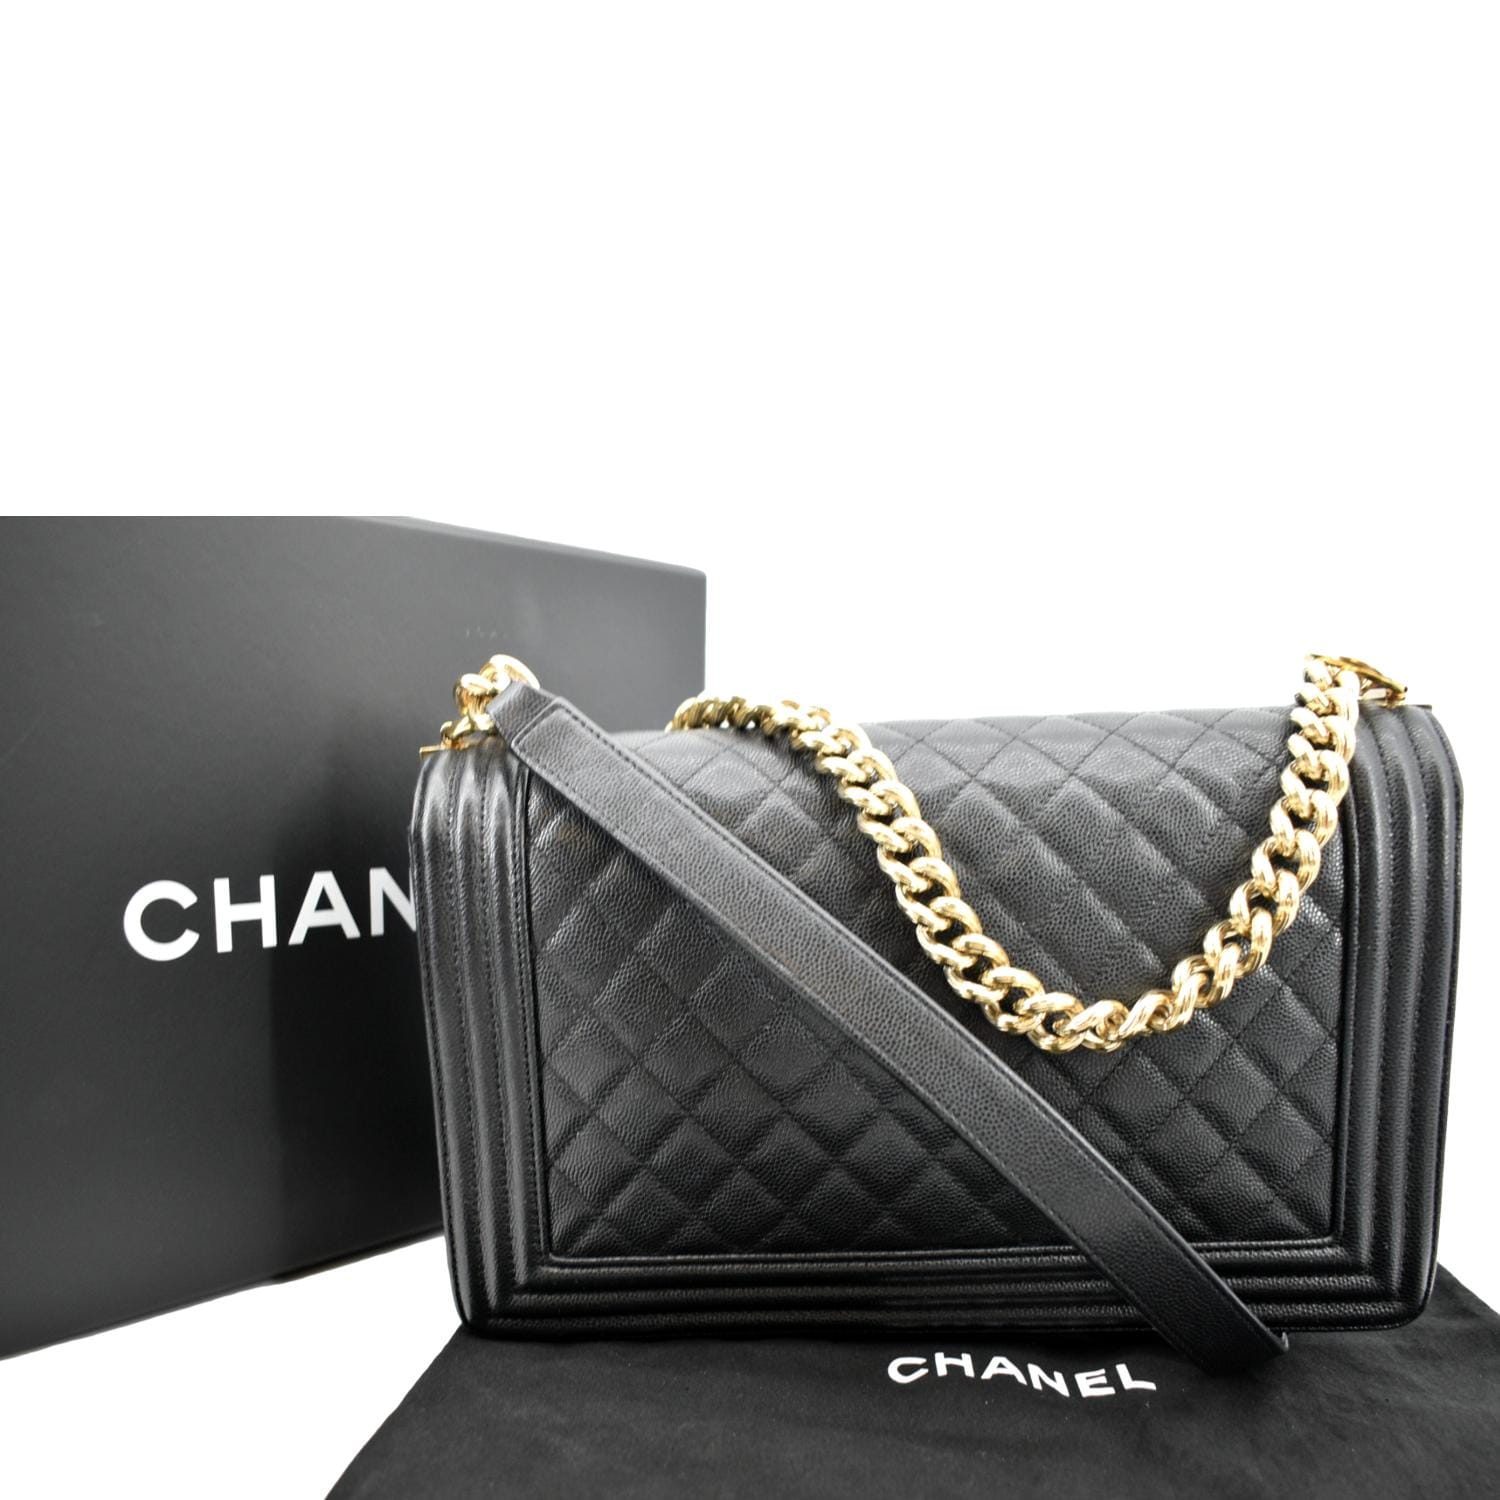 Chanel Orange Up In The Air Flap Leather Pony-style calfskin ref